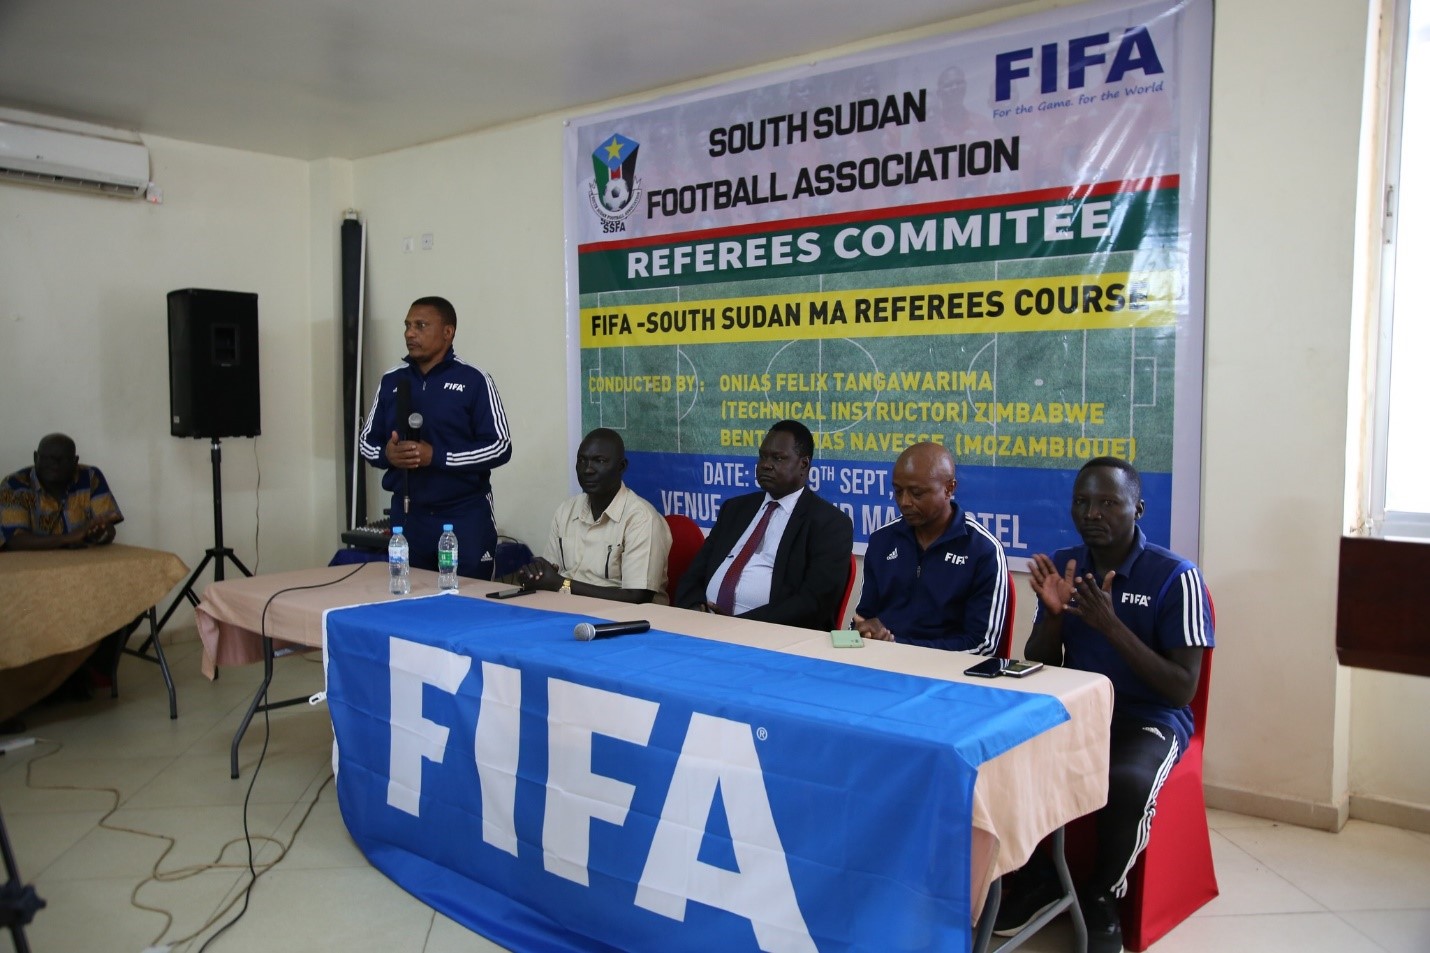 Match officials enrolled on FIFA refresher course